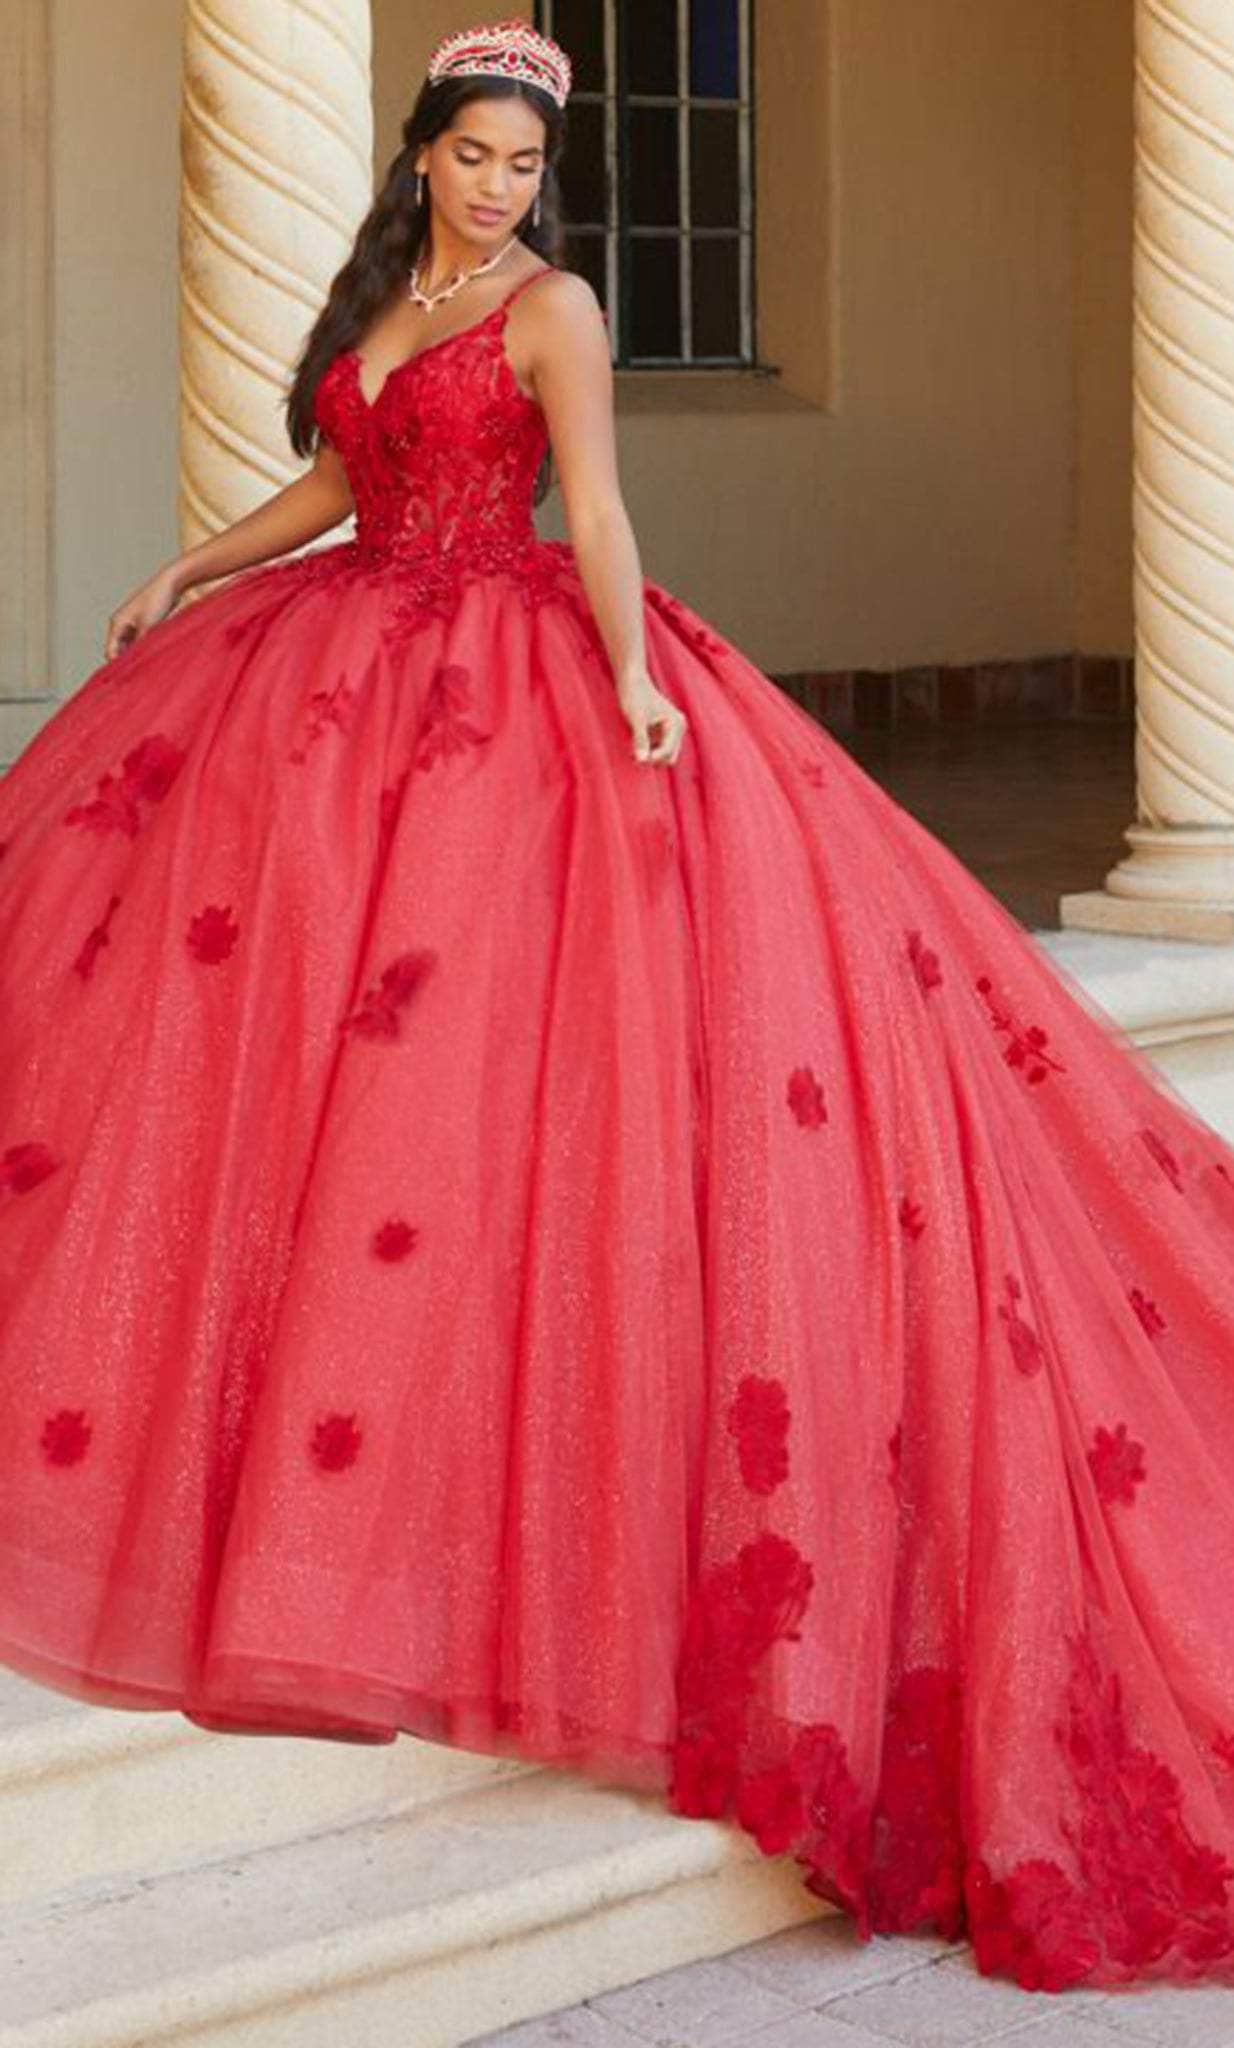 Quinceanera Collection 26064 - Lace Appliqué Sleeveless Ballgown Quinceanera Dresses 0 / Red